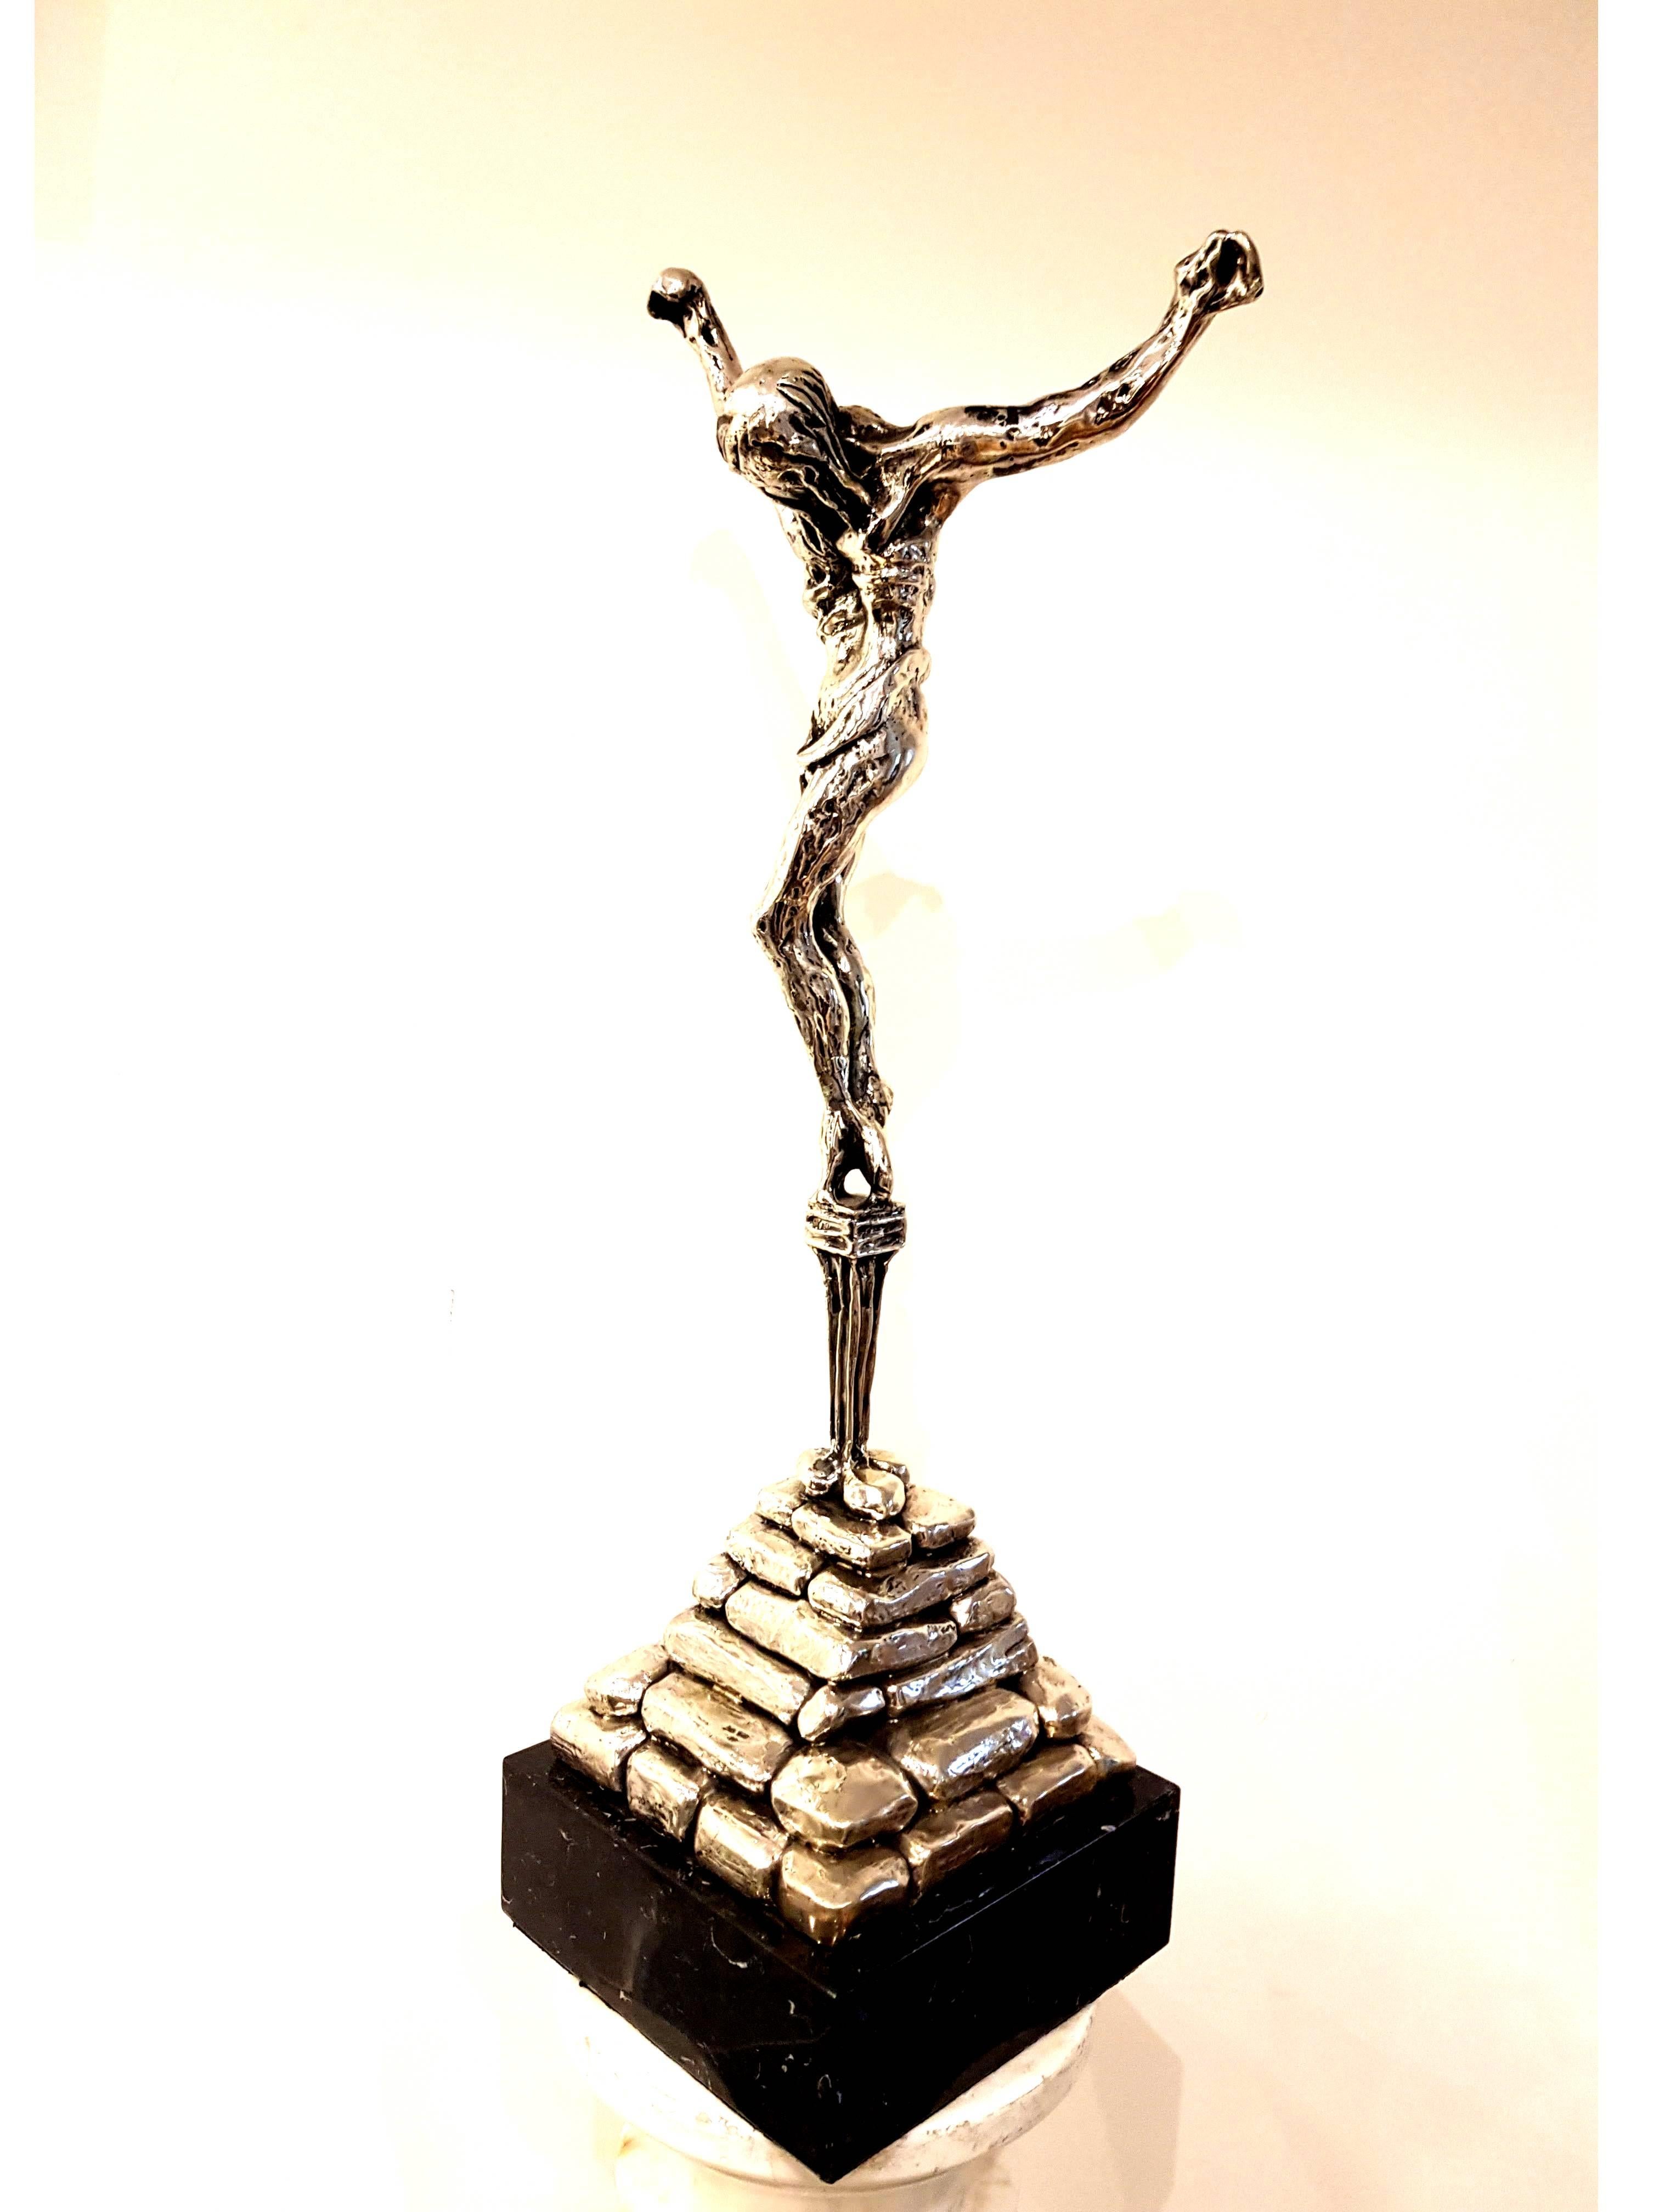 Dali -  "Christ of St John of the Cross" - Solid Silver Signed Sculpture